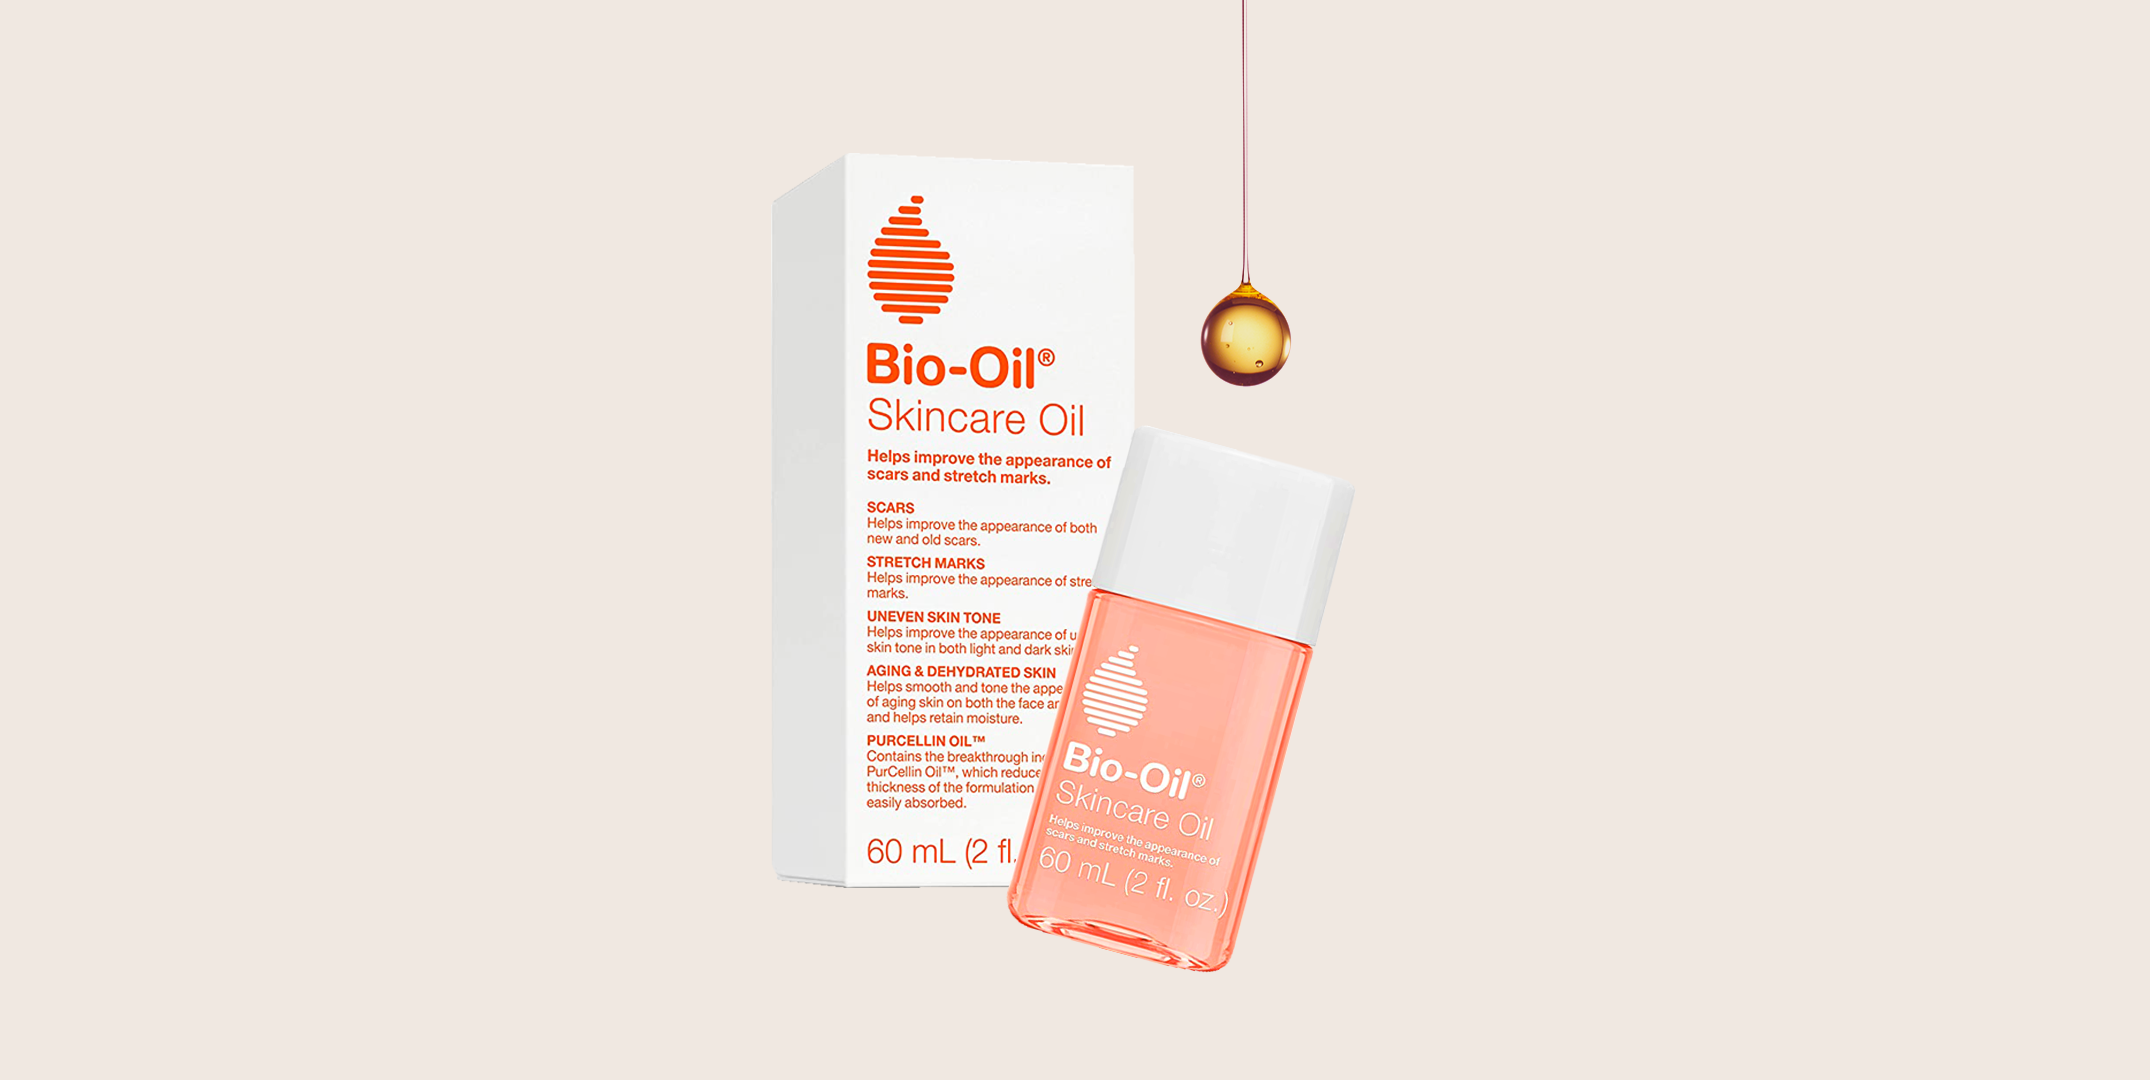 Bio-Oil Skincare Oil helps with stretch marks, dark spots and more